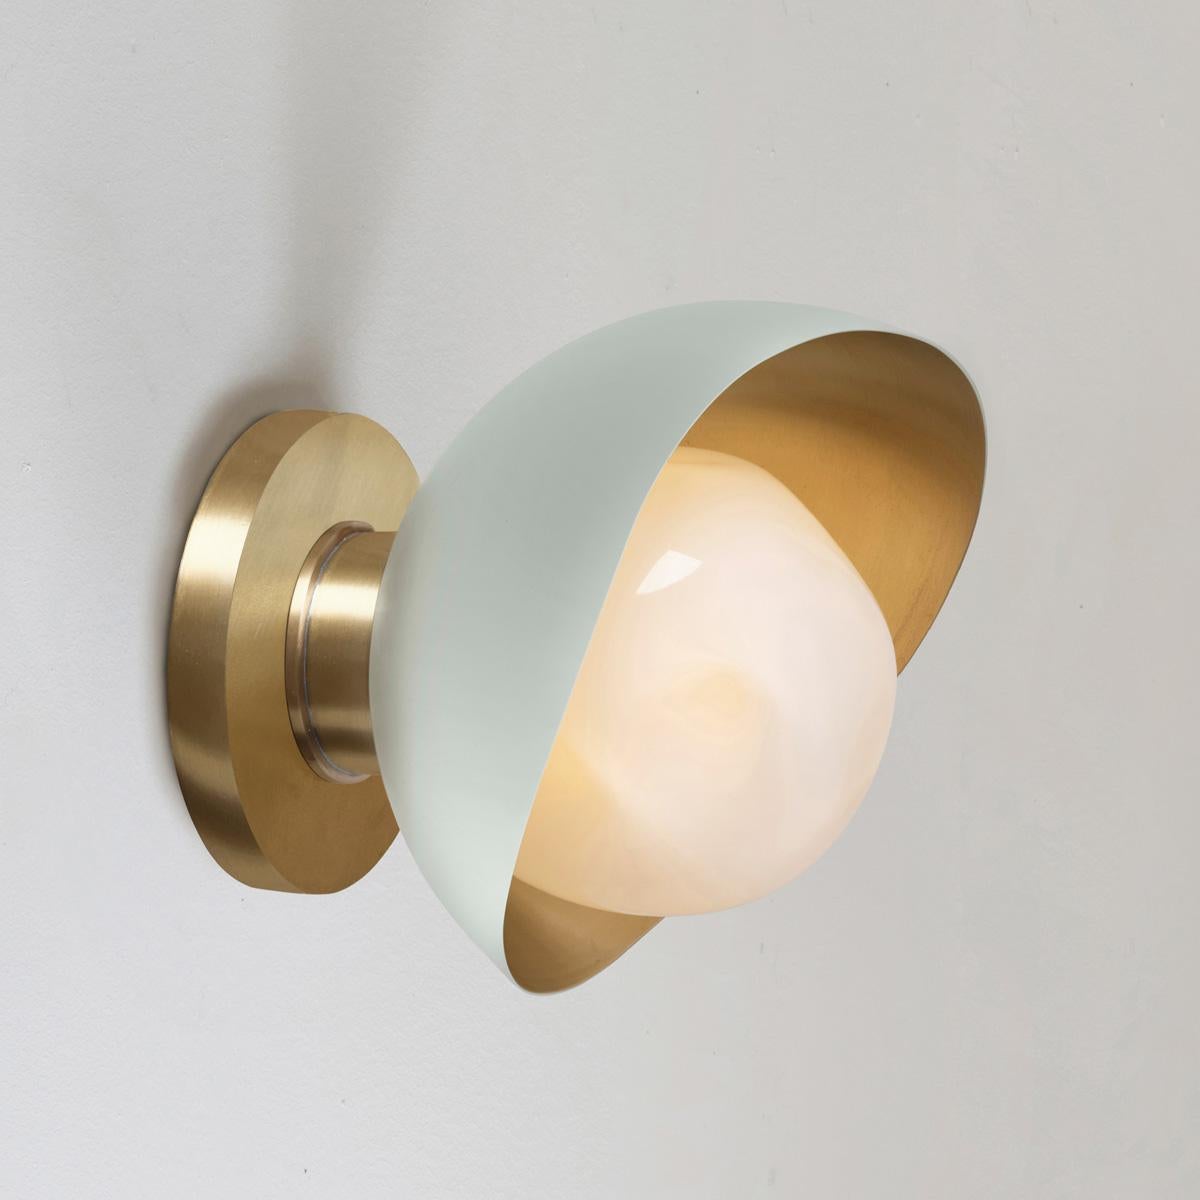 Perla Mini Wall Light by Gaspare Asaro. Powder Pink and Satin Brass Finish For Sale 2